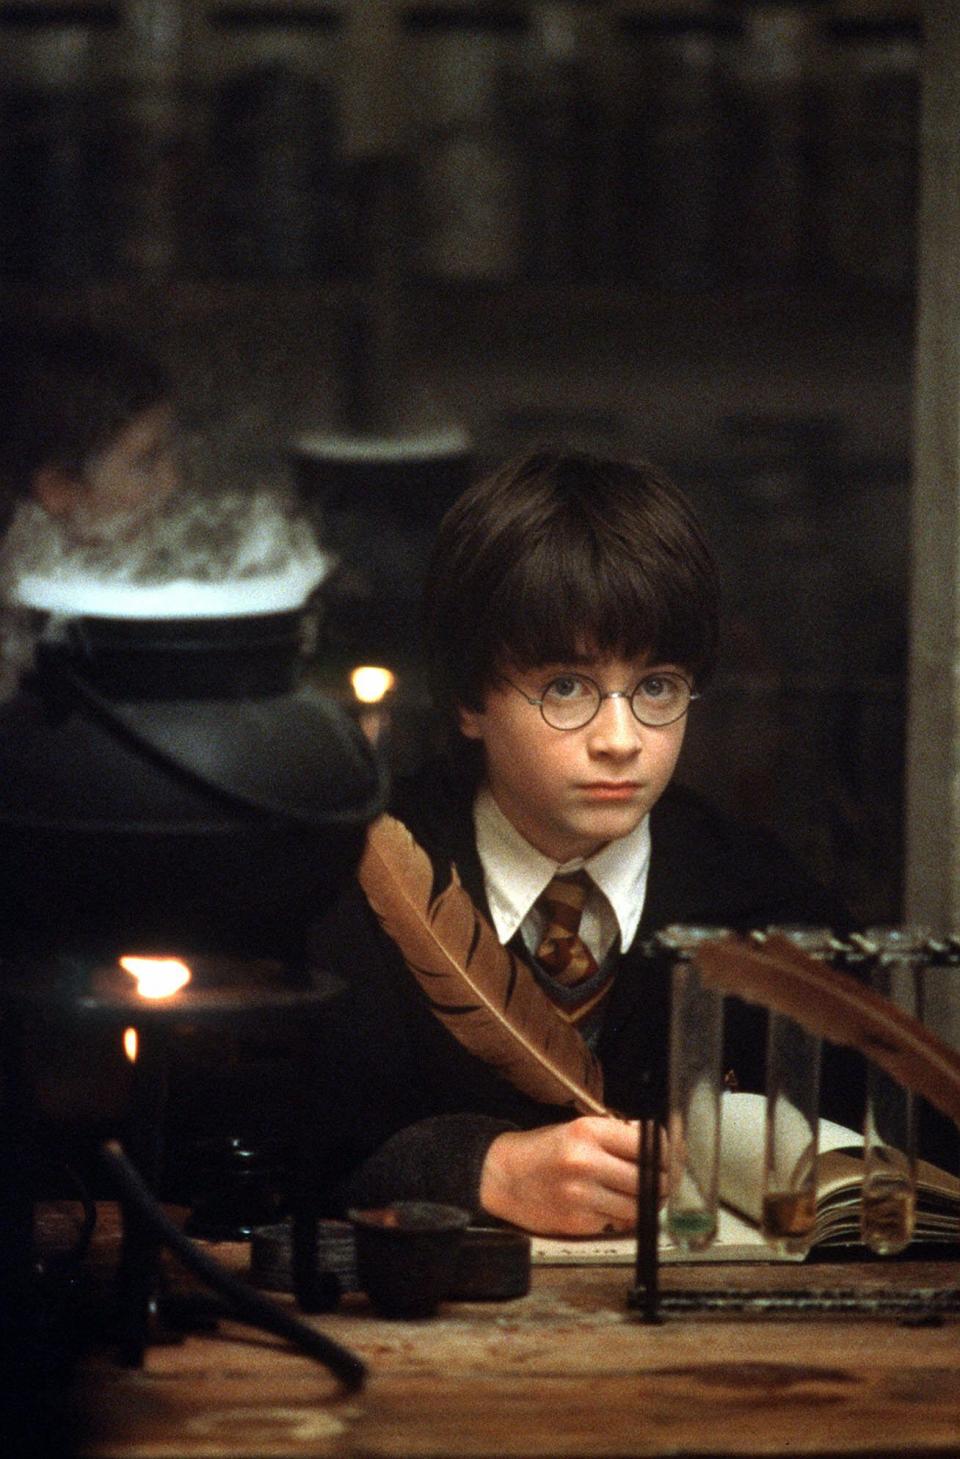 Daniel Radcliffe in a scene from "Harry Potter and the Sorcerer's Stone."